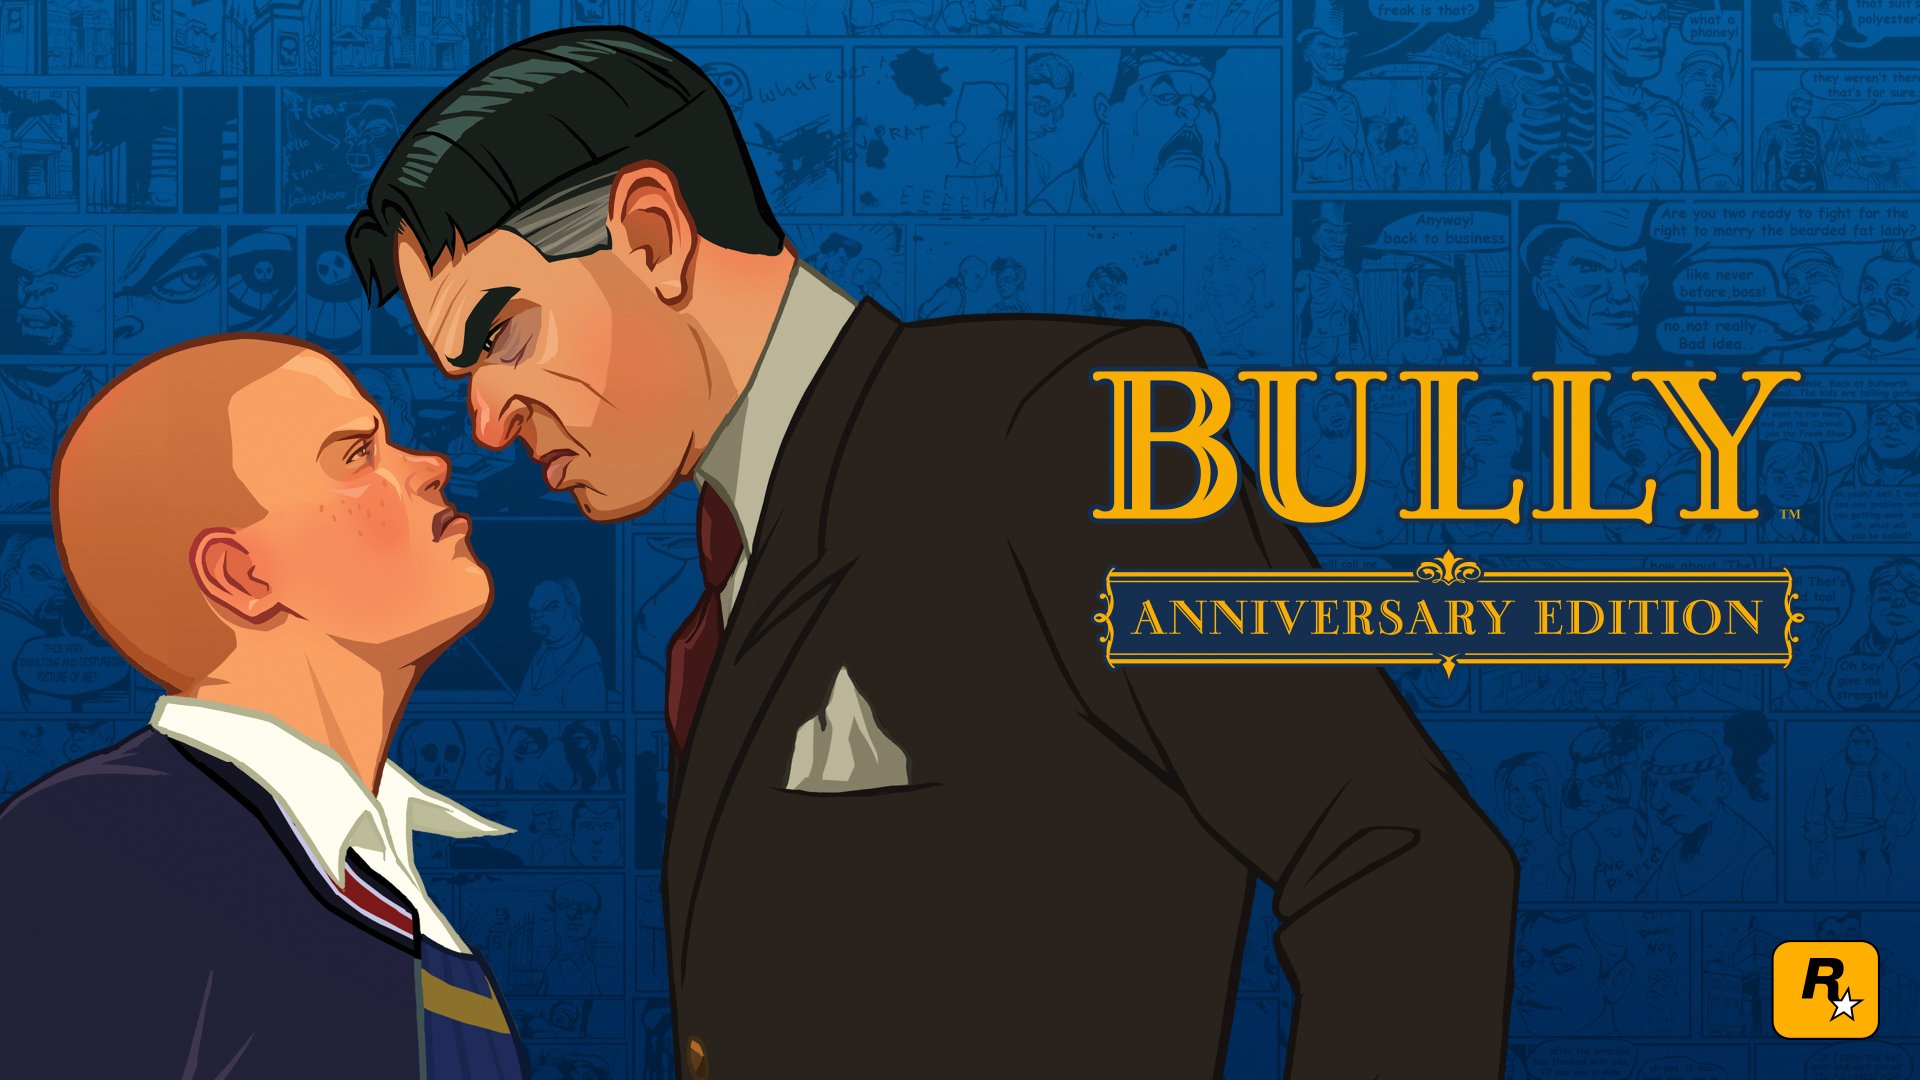 download game bully pc full version single link